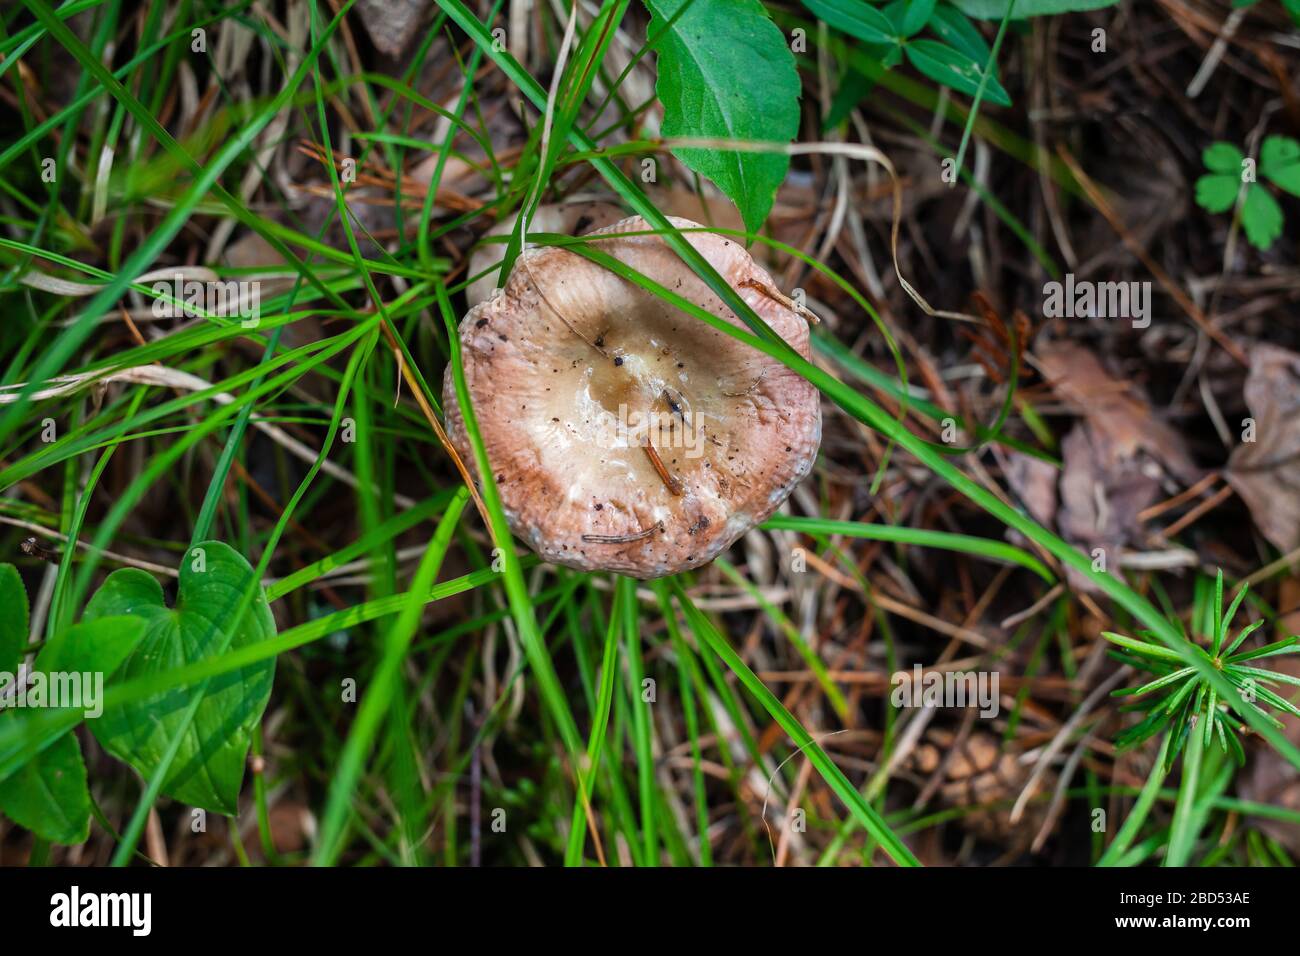 brown russula hid under forest debris and grass Stock Photo